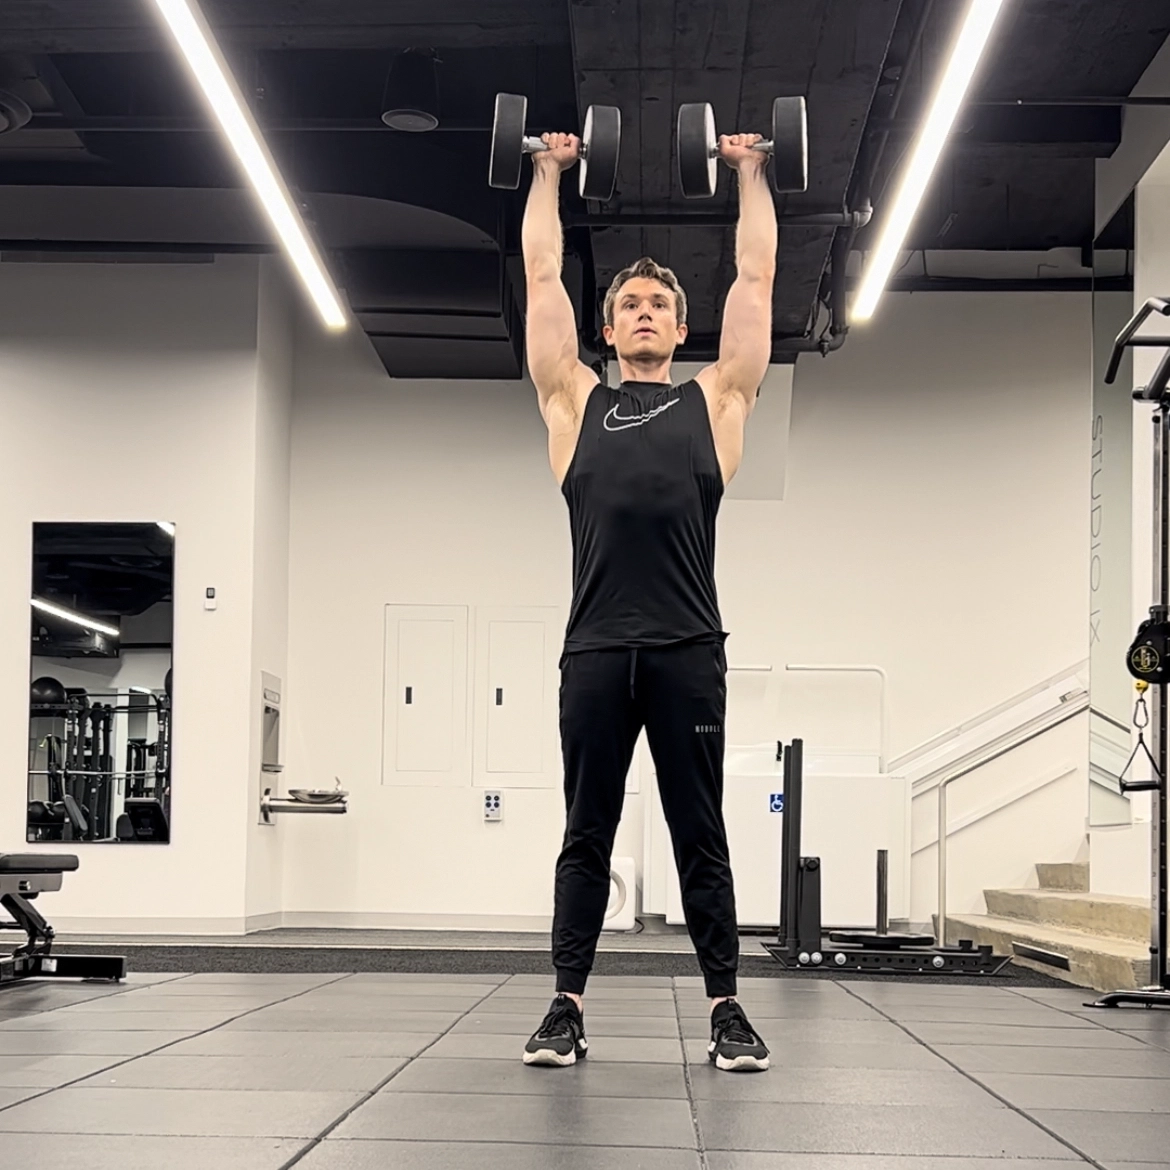 Cameron McCune does a dumbbell exercise at a workout facility. He wears black athletic pants, a black sleeveless shirt and black sneakers. He stands with his feet shoulder-width apart and aises his arms directly above his head, holding a dumbbell in each hand.